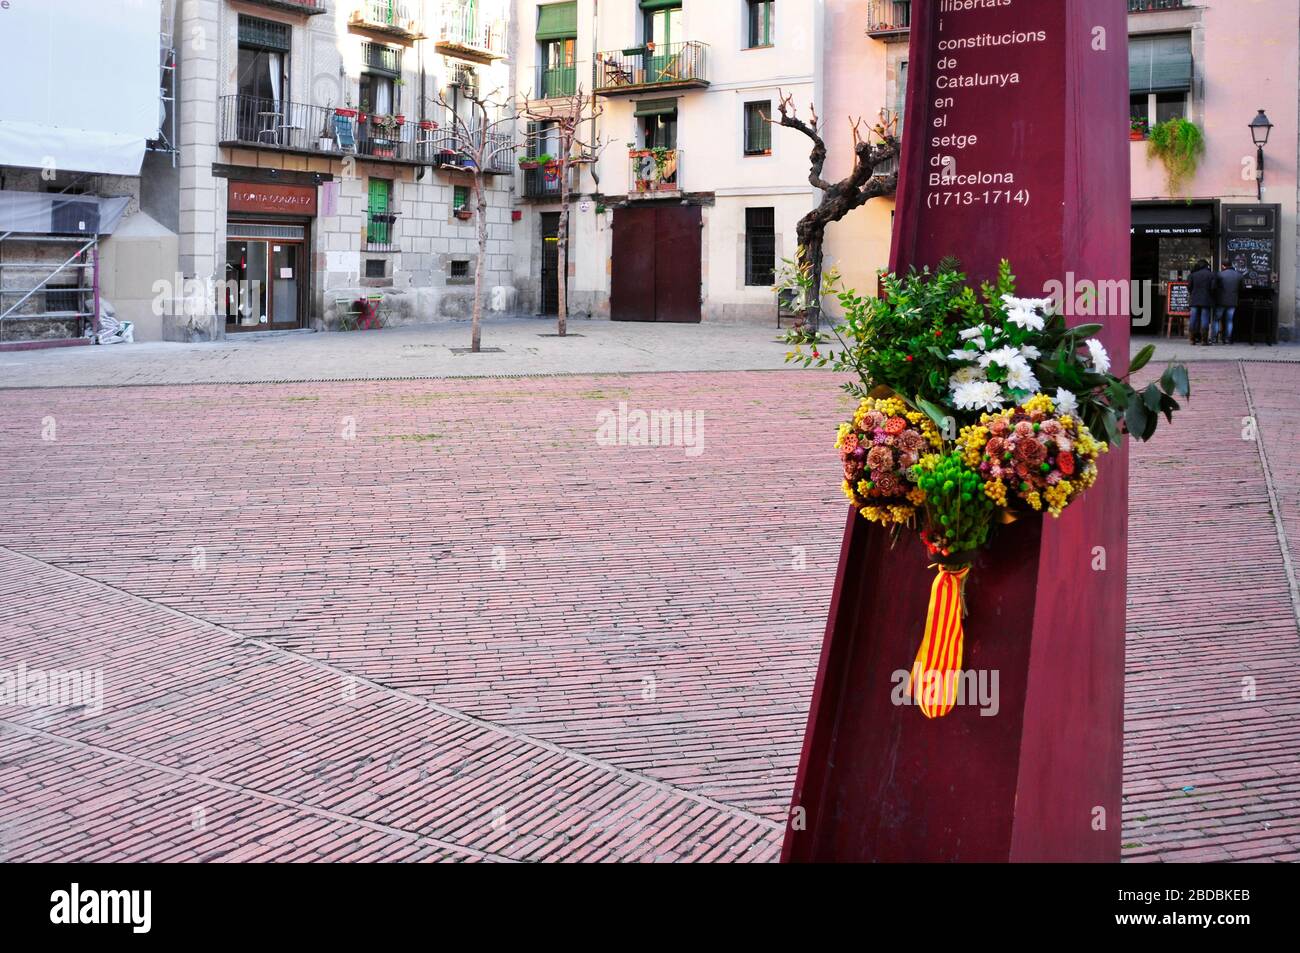 BARCELONA, SPAIN - JANUARY 10: El Fossar de les Moreres on January 10, 2015 in Barcelona, Spain. It is a memorial plaza with an eternal flame in memor Stock Photo